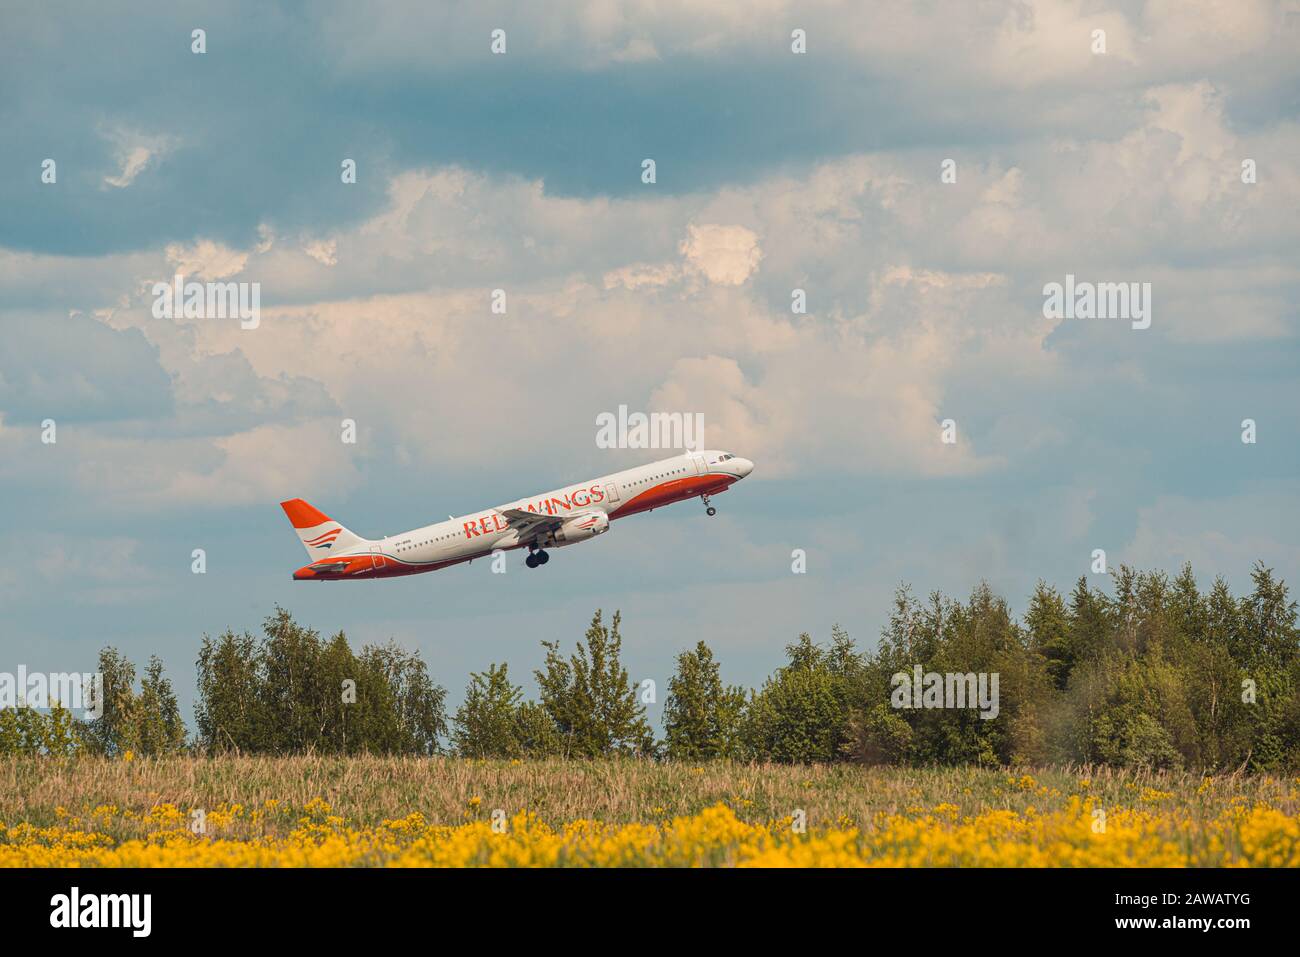 Domodedovo, Russia - May 12, 2019: Red Wings Airbus A321-231 side number VP-BRB Airlines take off at Domodedovo airport, Moscow Region Stock Photo